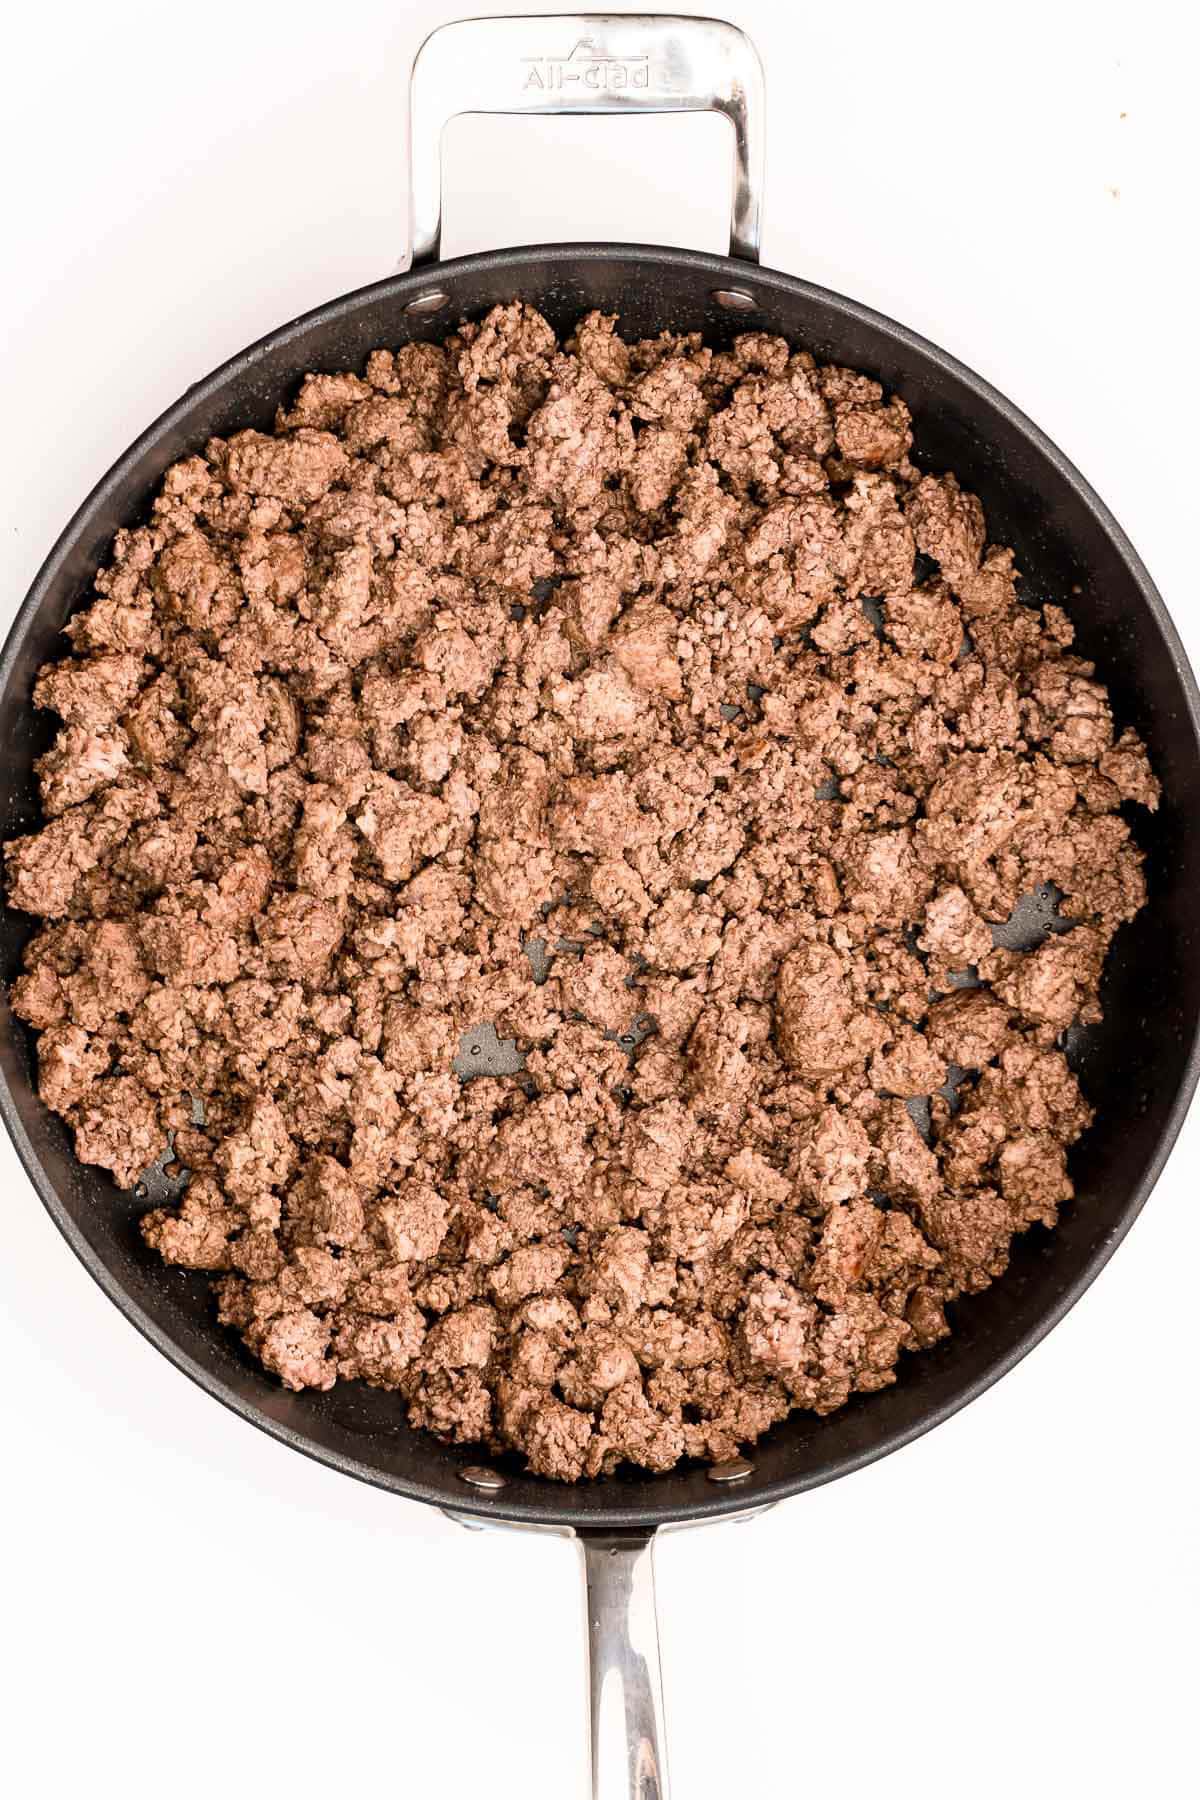 Brown ground beef in a skillet